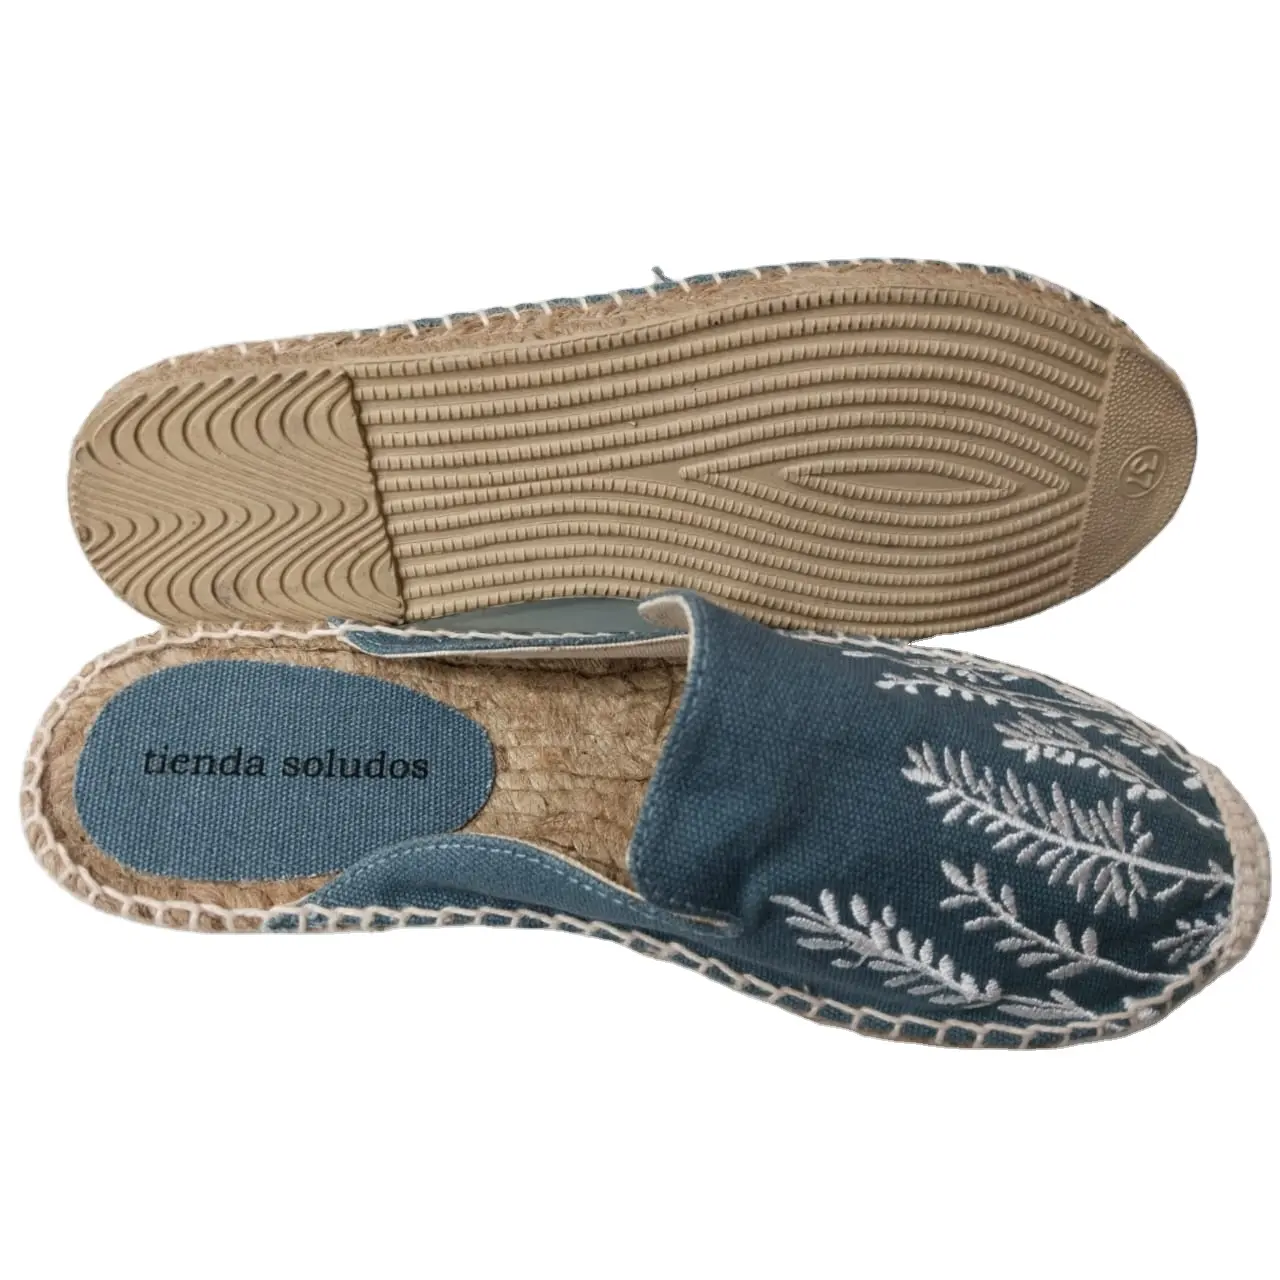 Latest 2023 fashionable printed canvas embroidery insole patch espadrille for women & girl available at different color & size